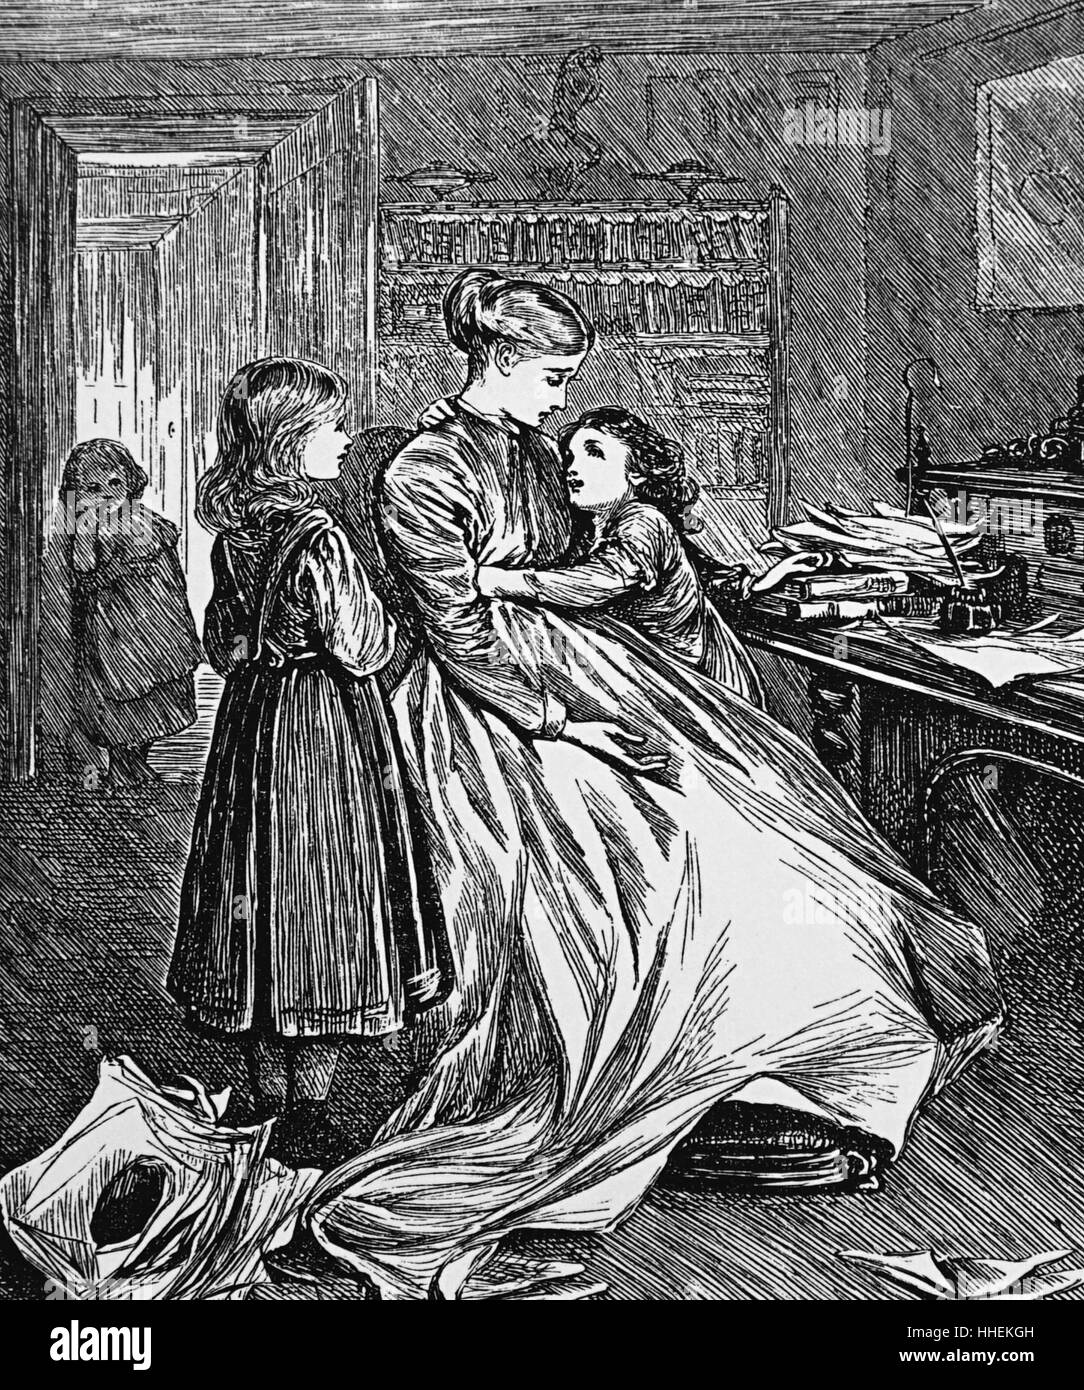 Illustration titled 'Mother and Daughters'. Illustration by Mary Ellen Edwards (1838-1934) an English artist and prolific illustrator of children's books. Dated 19th Century Stock Photo